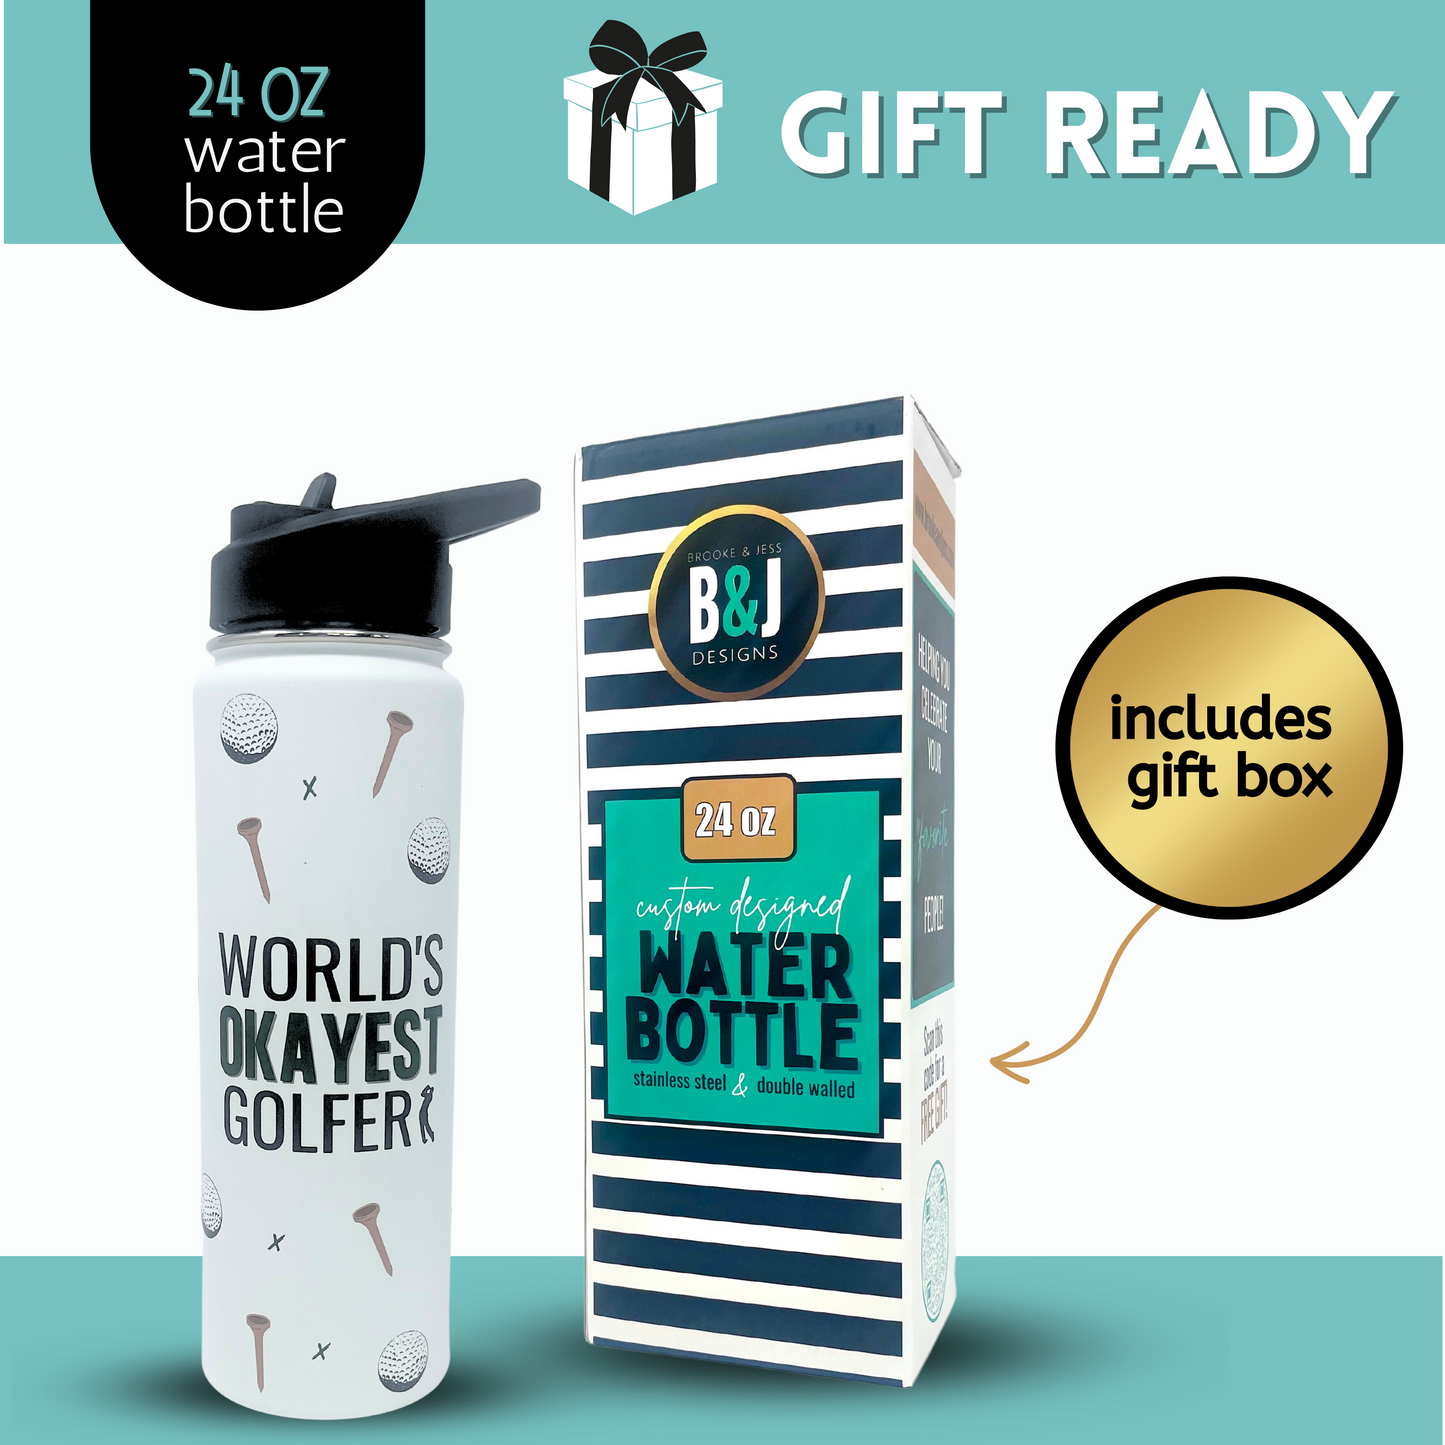 Golf Gifts for Men Unique - Golf Water Bottle Mug Tumbler Coffee Mugs Golf - Funny Golf Gift for Grandpa, Dad, Retirement, Fathers Day Gift for Golfer, Golf accessories for Men Funny